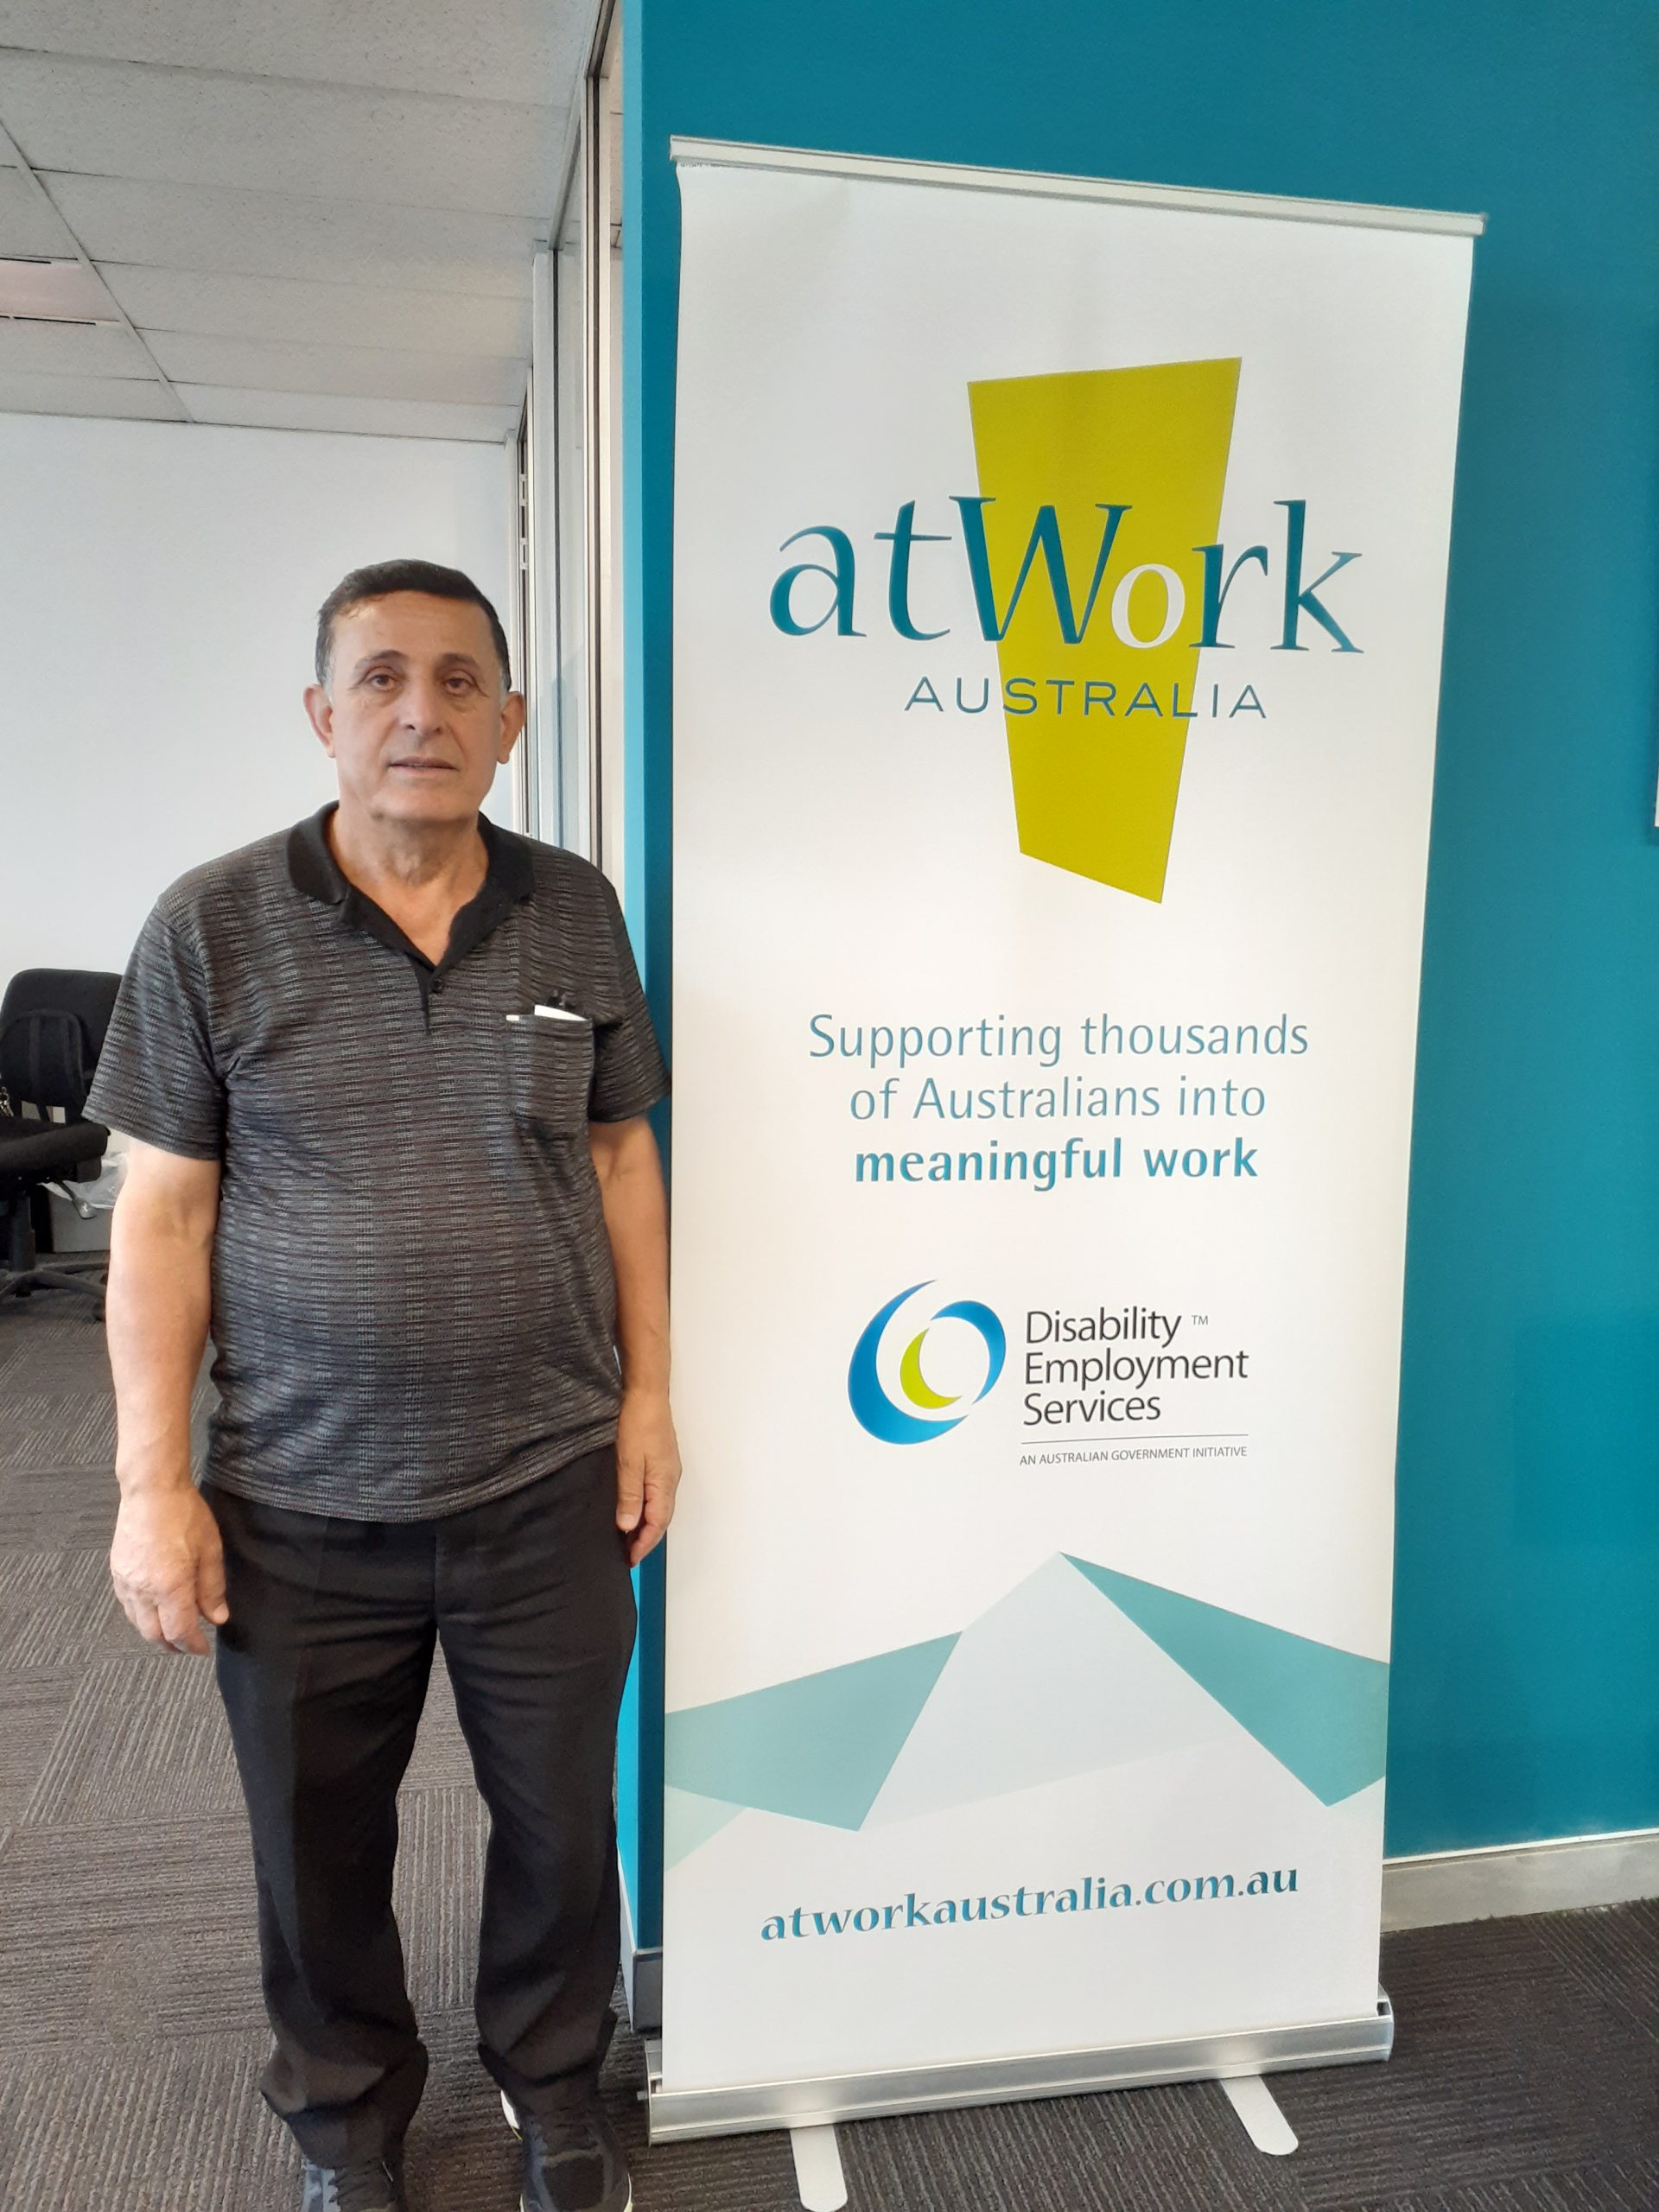 Ali sees a light at the end of the tunnel through employment